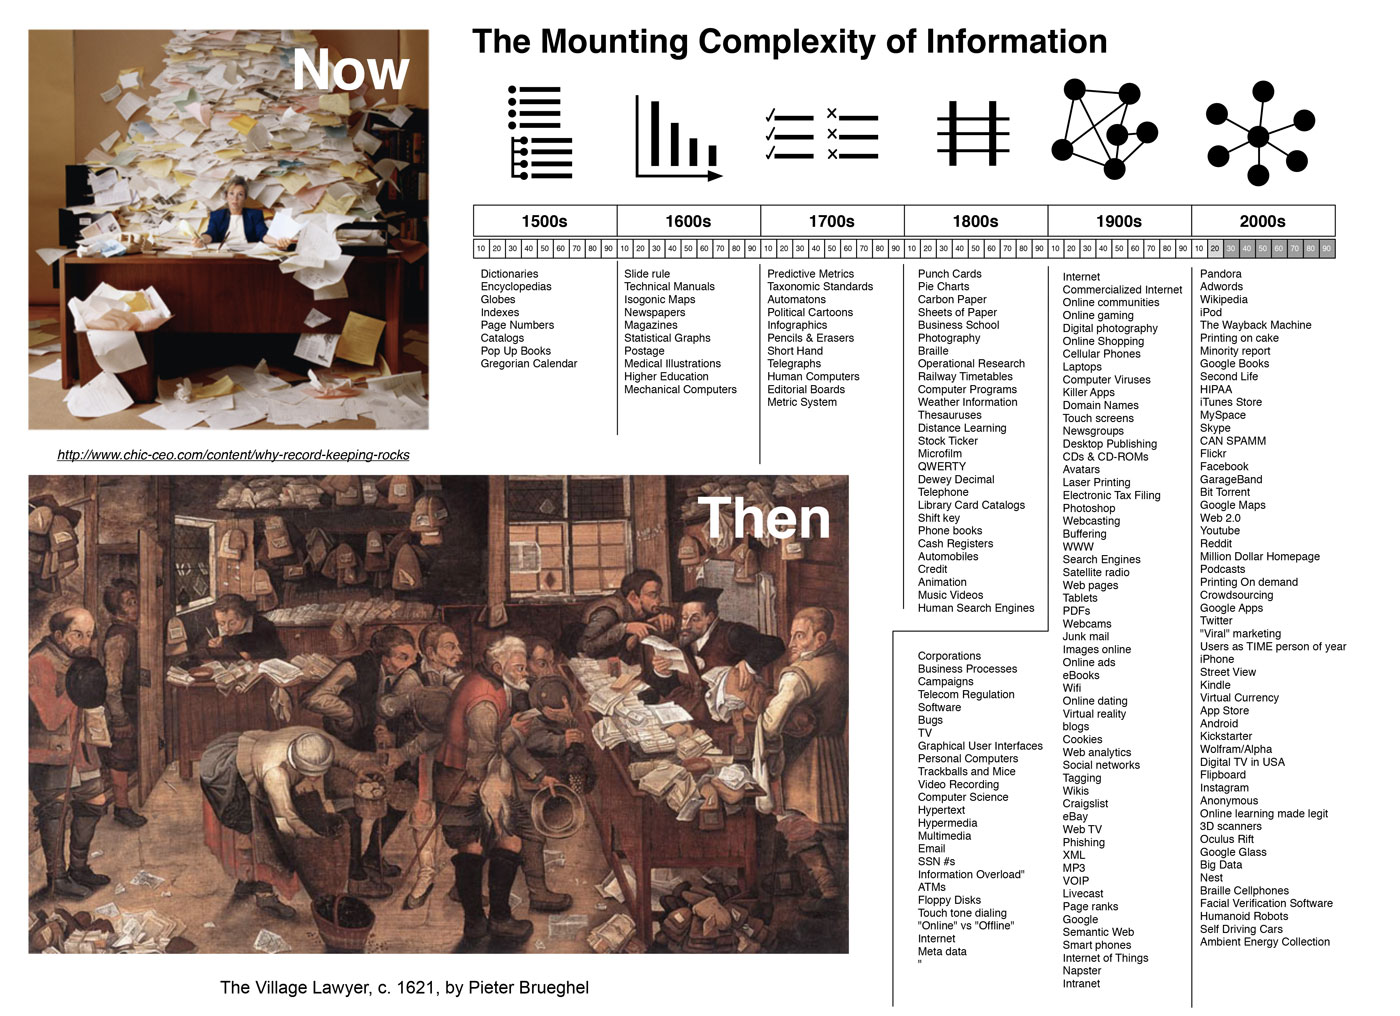 The Mounting Complexity of Information